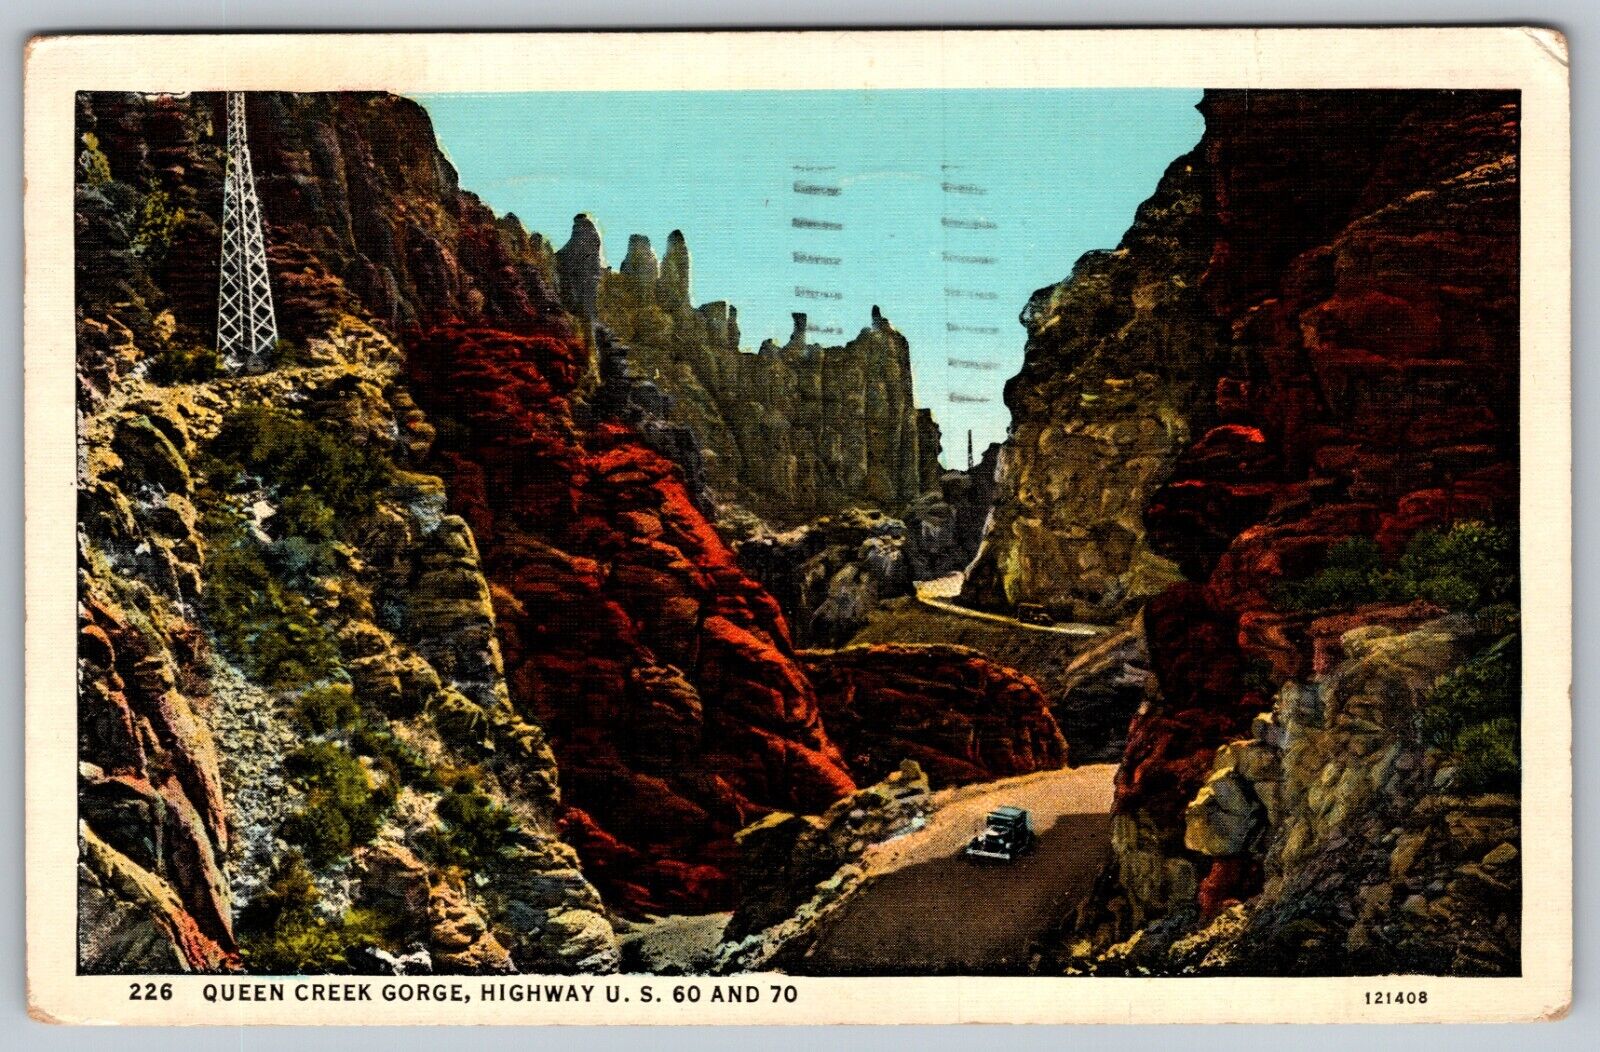 NEW MEXICO POSTCARD QUEEN CREEK GORGE HIGHWAY 60 AND 180 CURTEICH 1938 POSTCARD